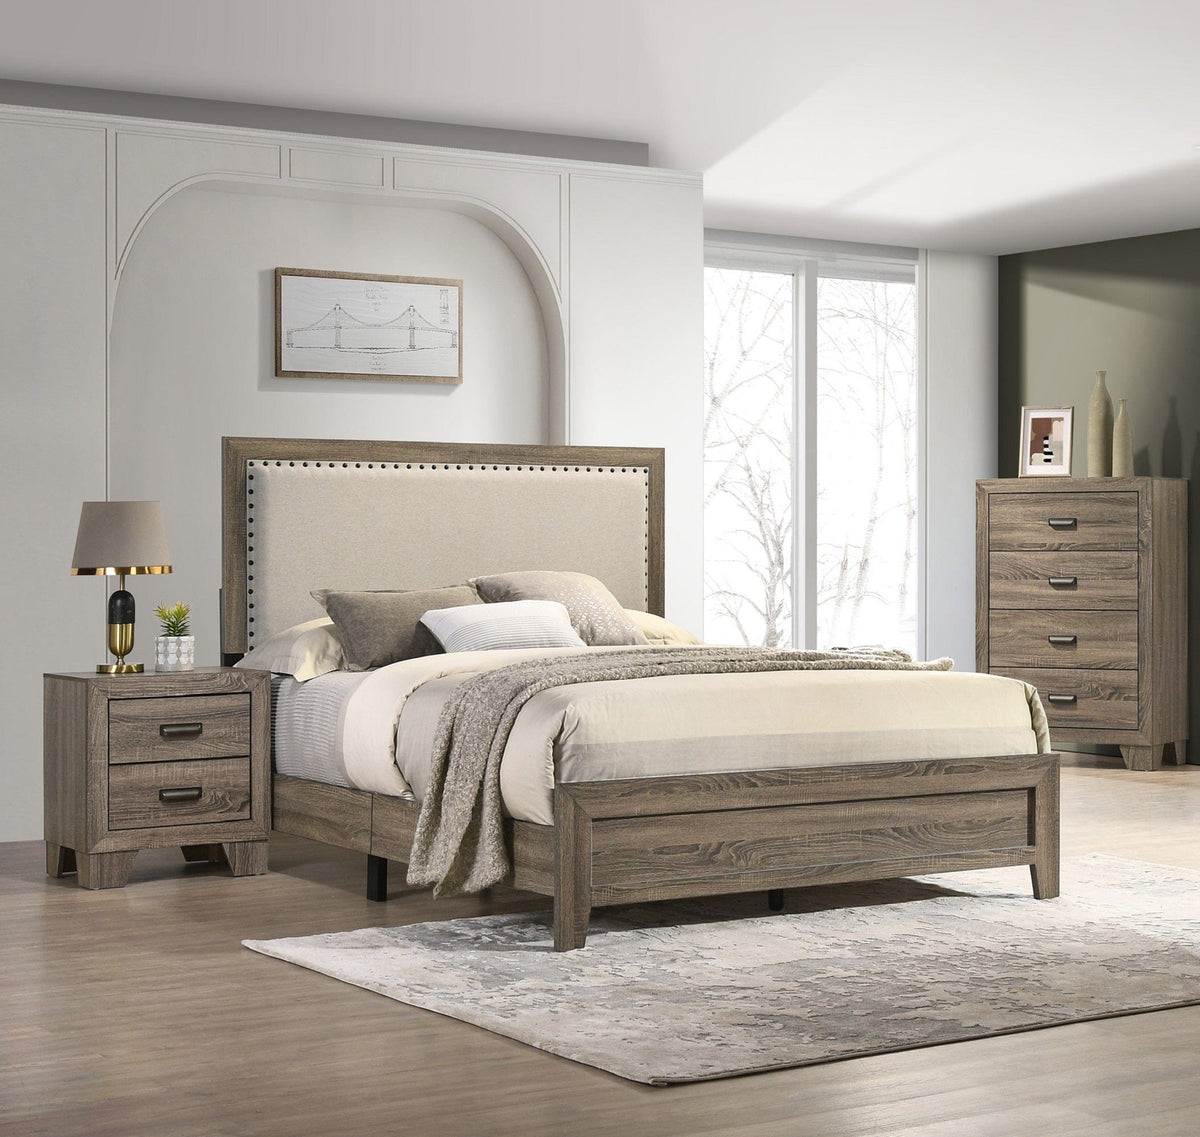 Kanepe Frisco Queen Grey Wooden Bed with Nailhead Fabric Trim Mattress-Xperts-Florida